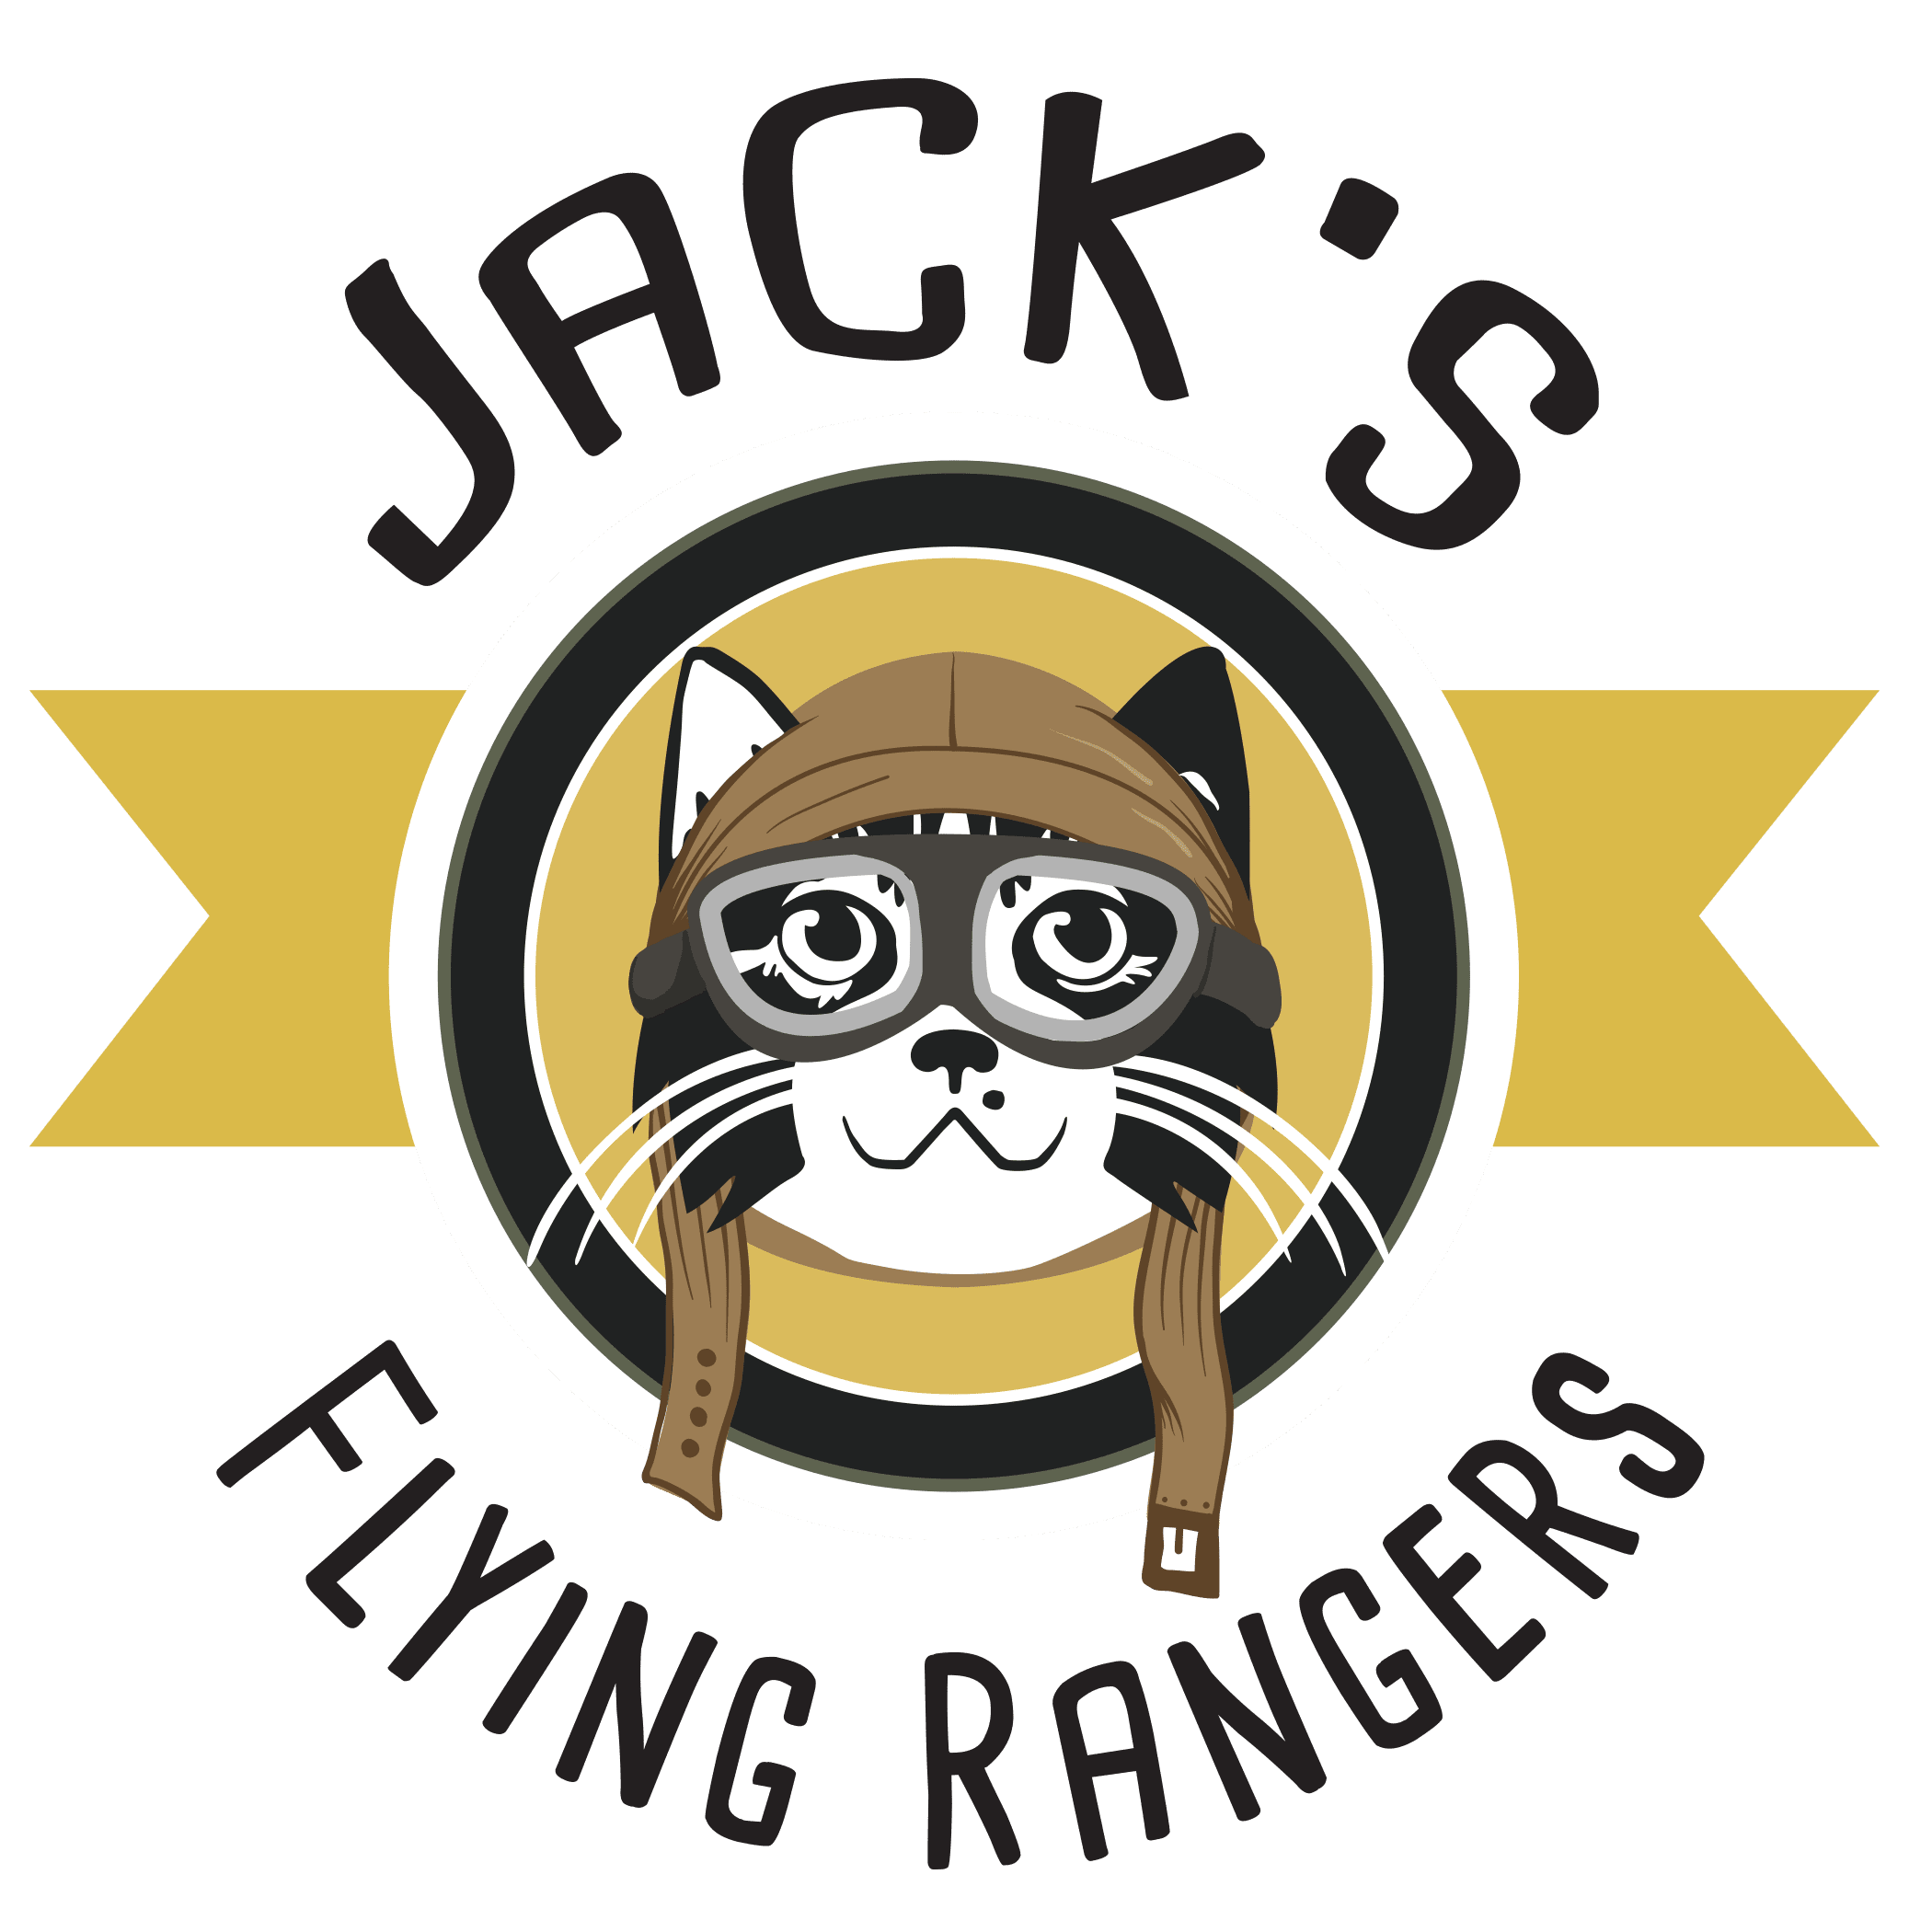 You are currently viewing Jack’s Flying Rangers: The Experience New Hampshire Video